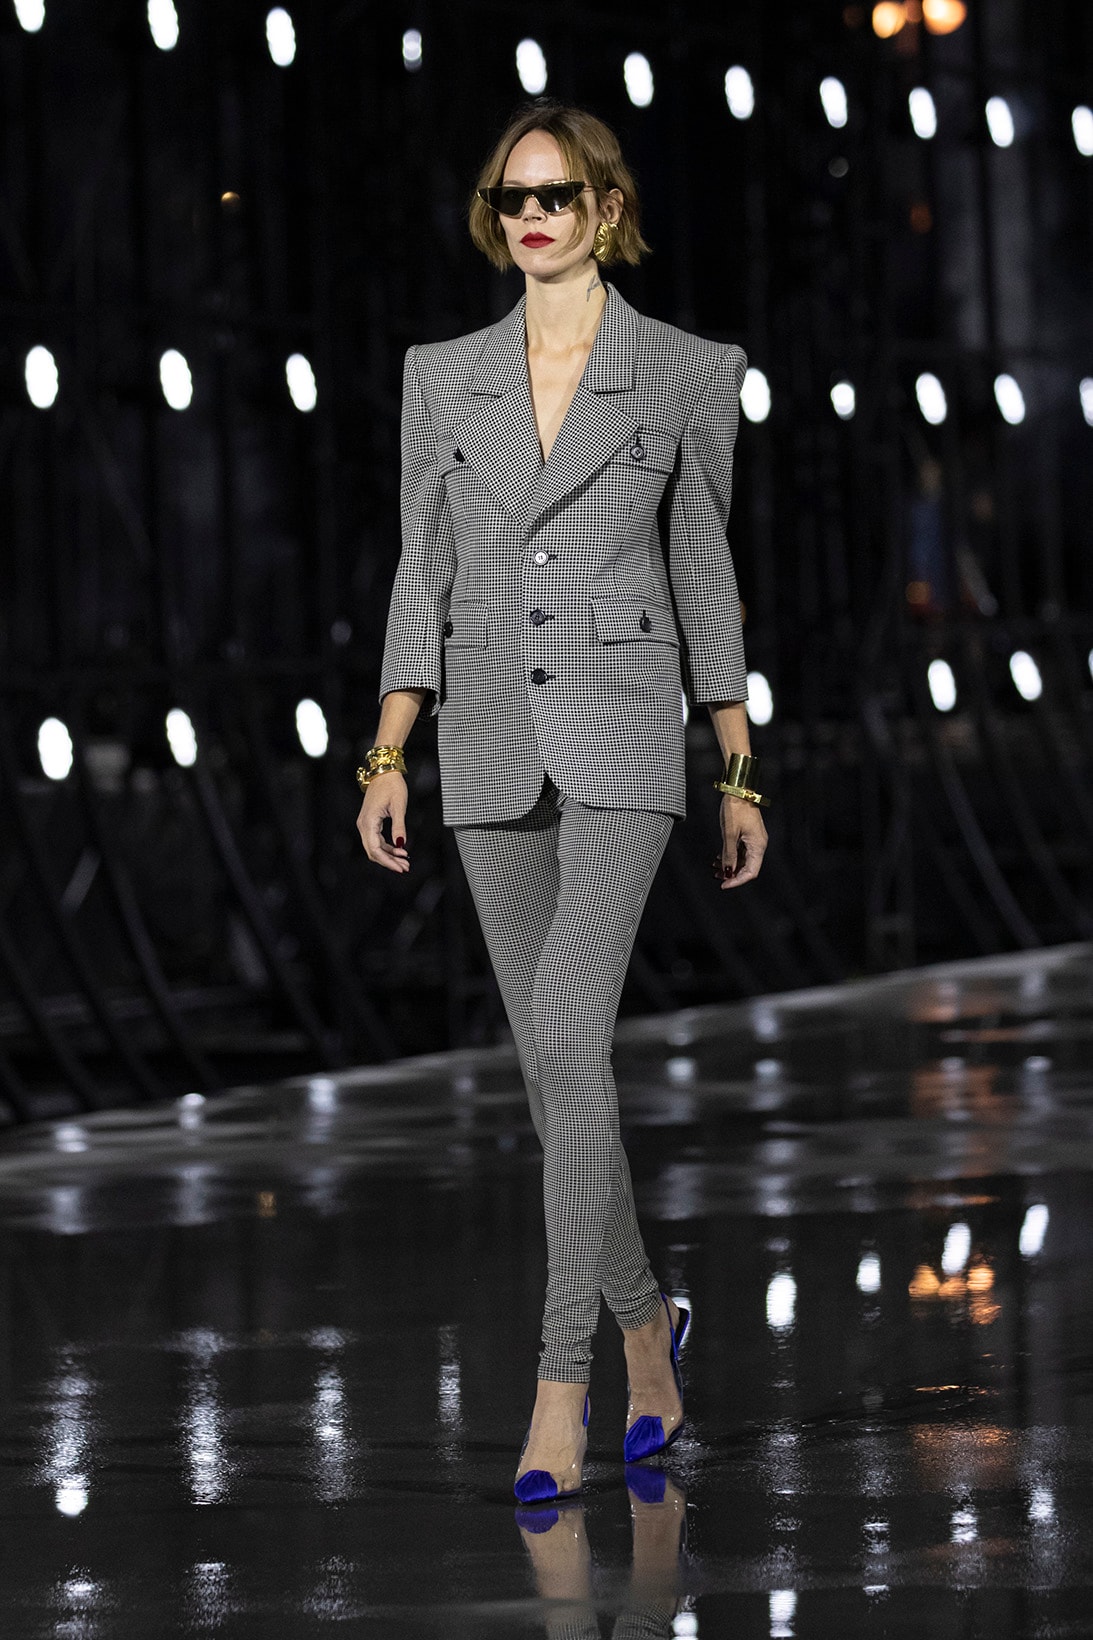 Saint Laurent YSL Spring Summer 2022 SS22 Collection Runway Show Paris Fashion Week Anthony Vaccarello